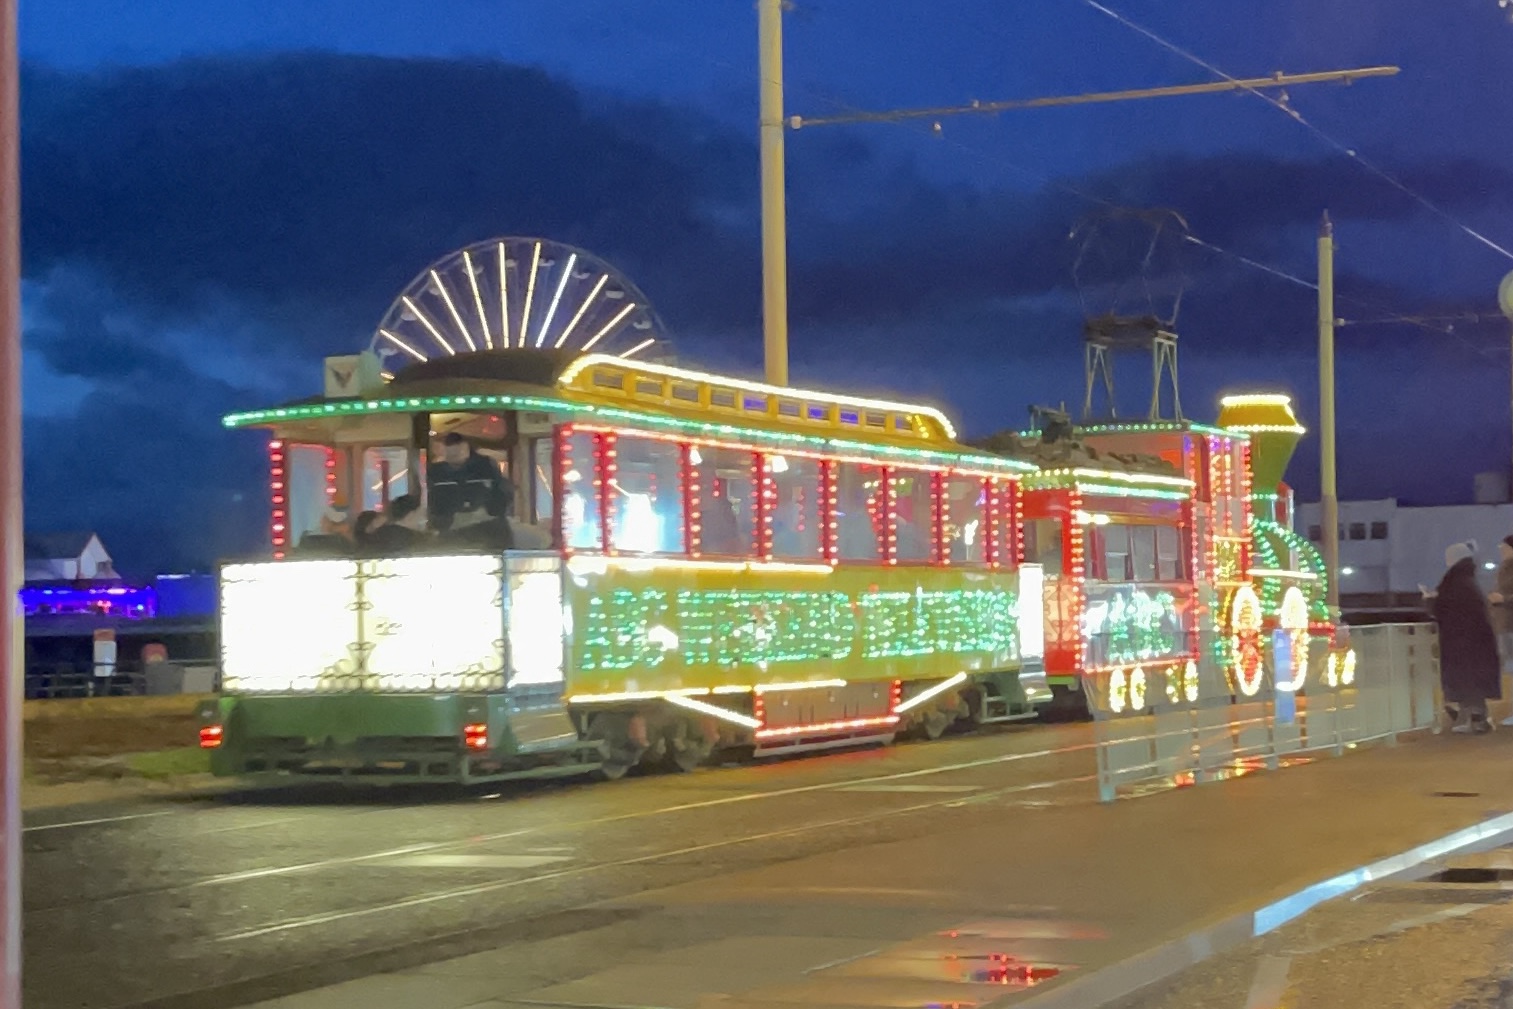 A Blackpool tram dressed up as a train during the illuminations